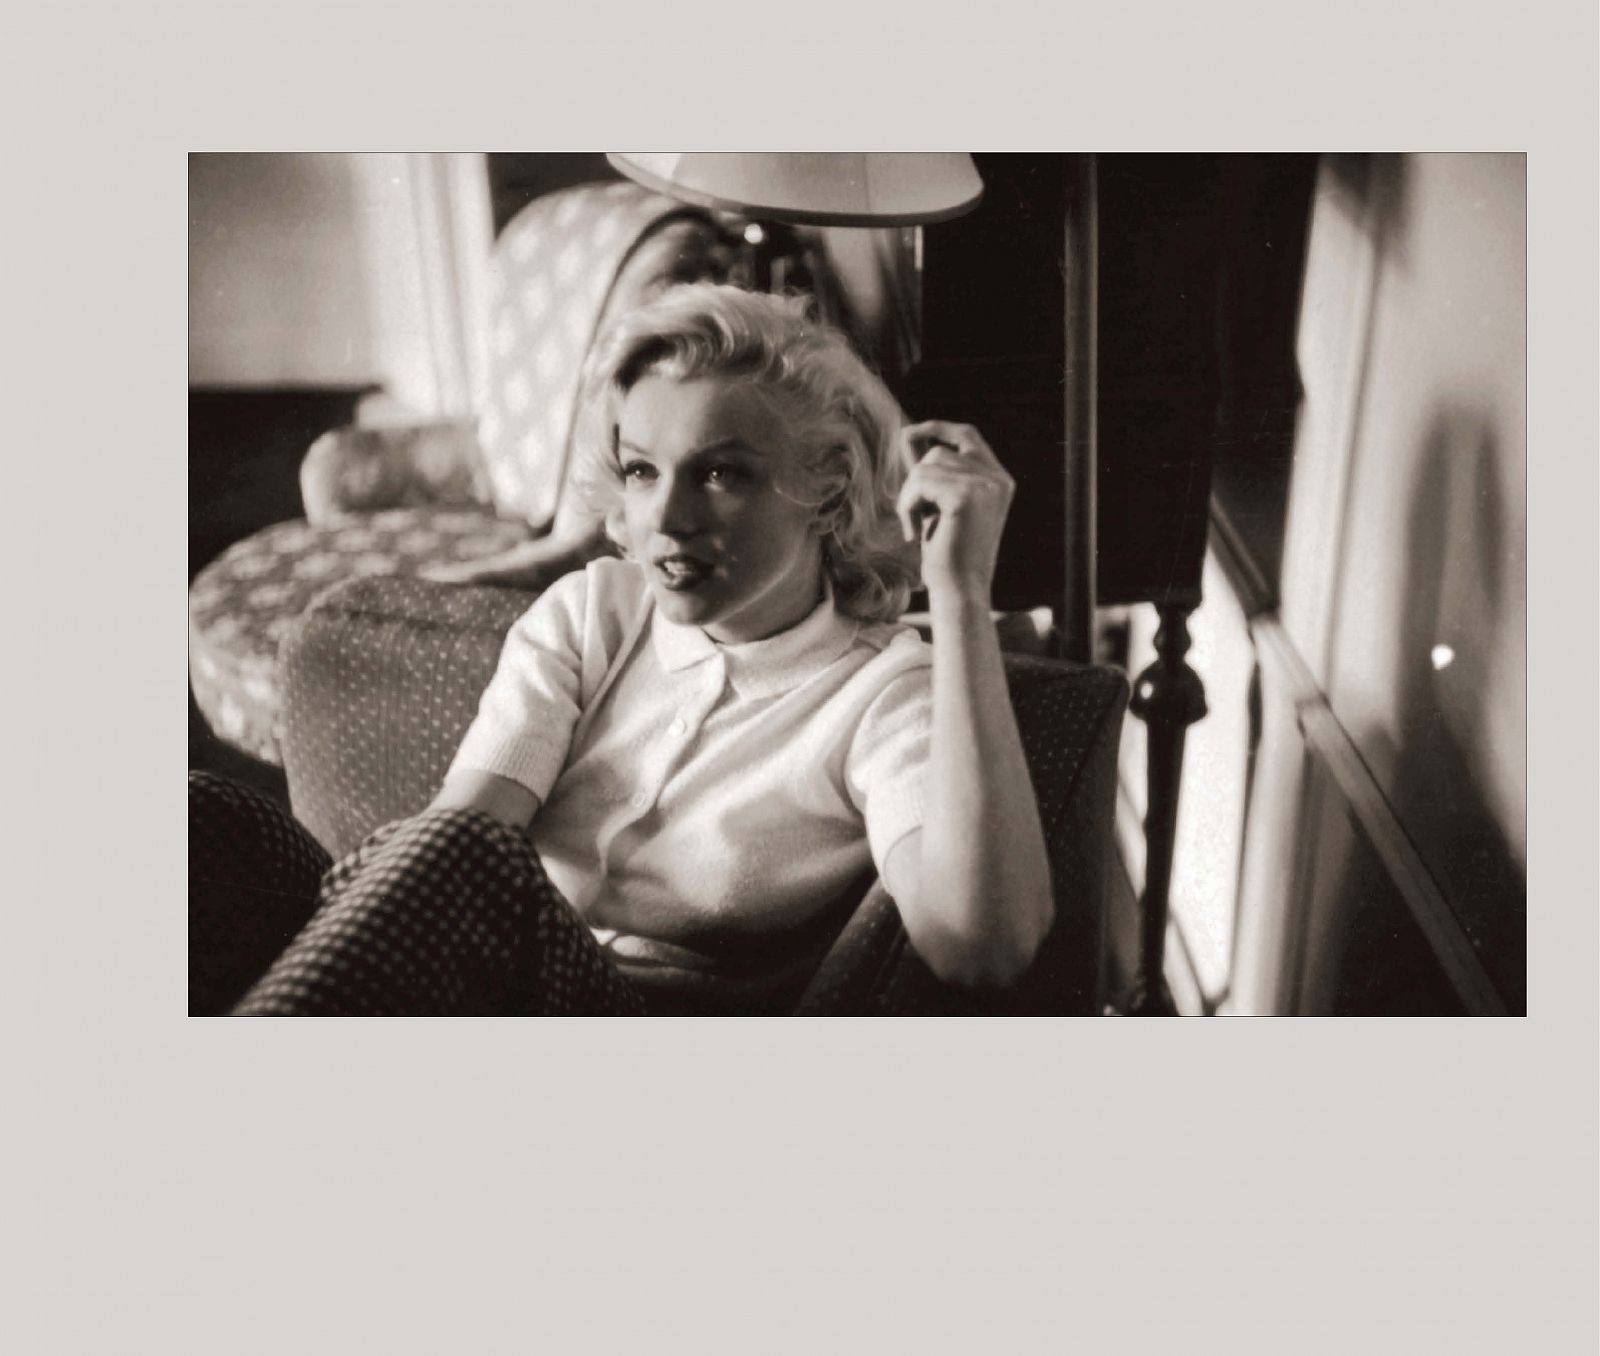 Handout image shows actress Marilyn Monroe from a collection of previously unpublished photos of her in Alberta